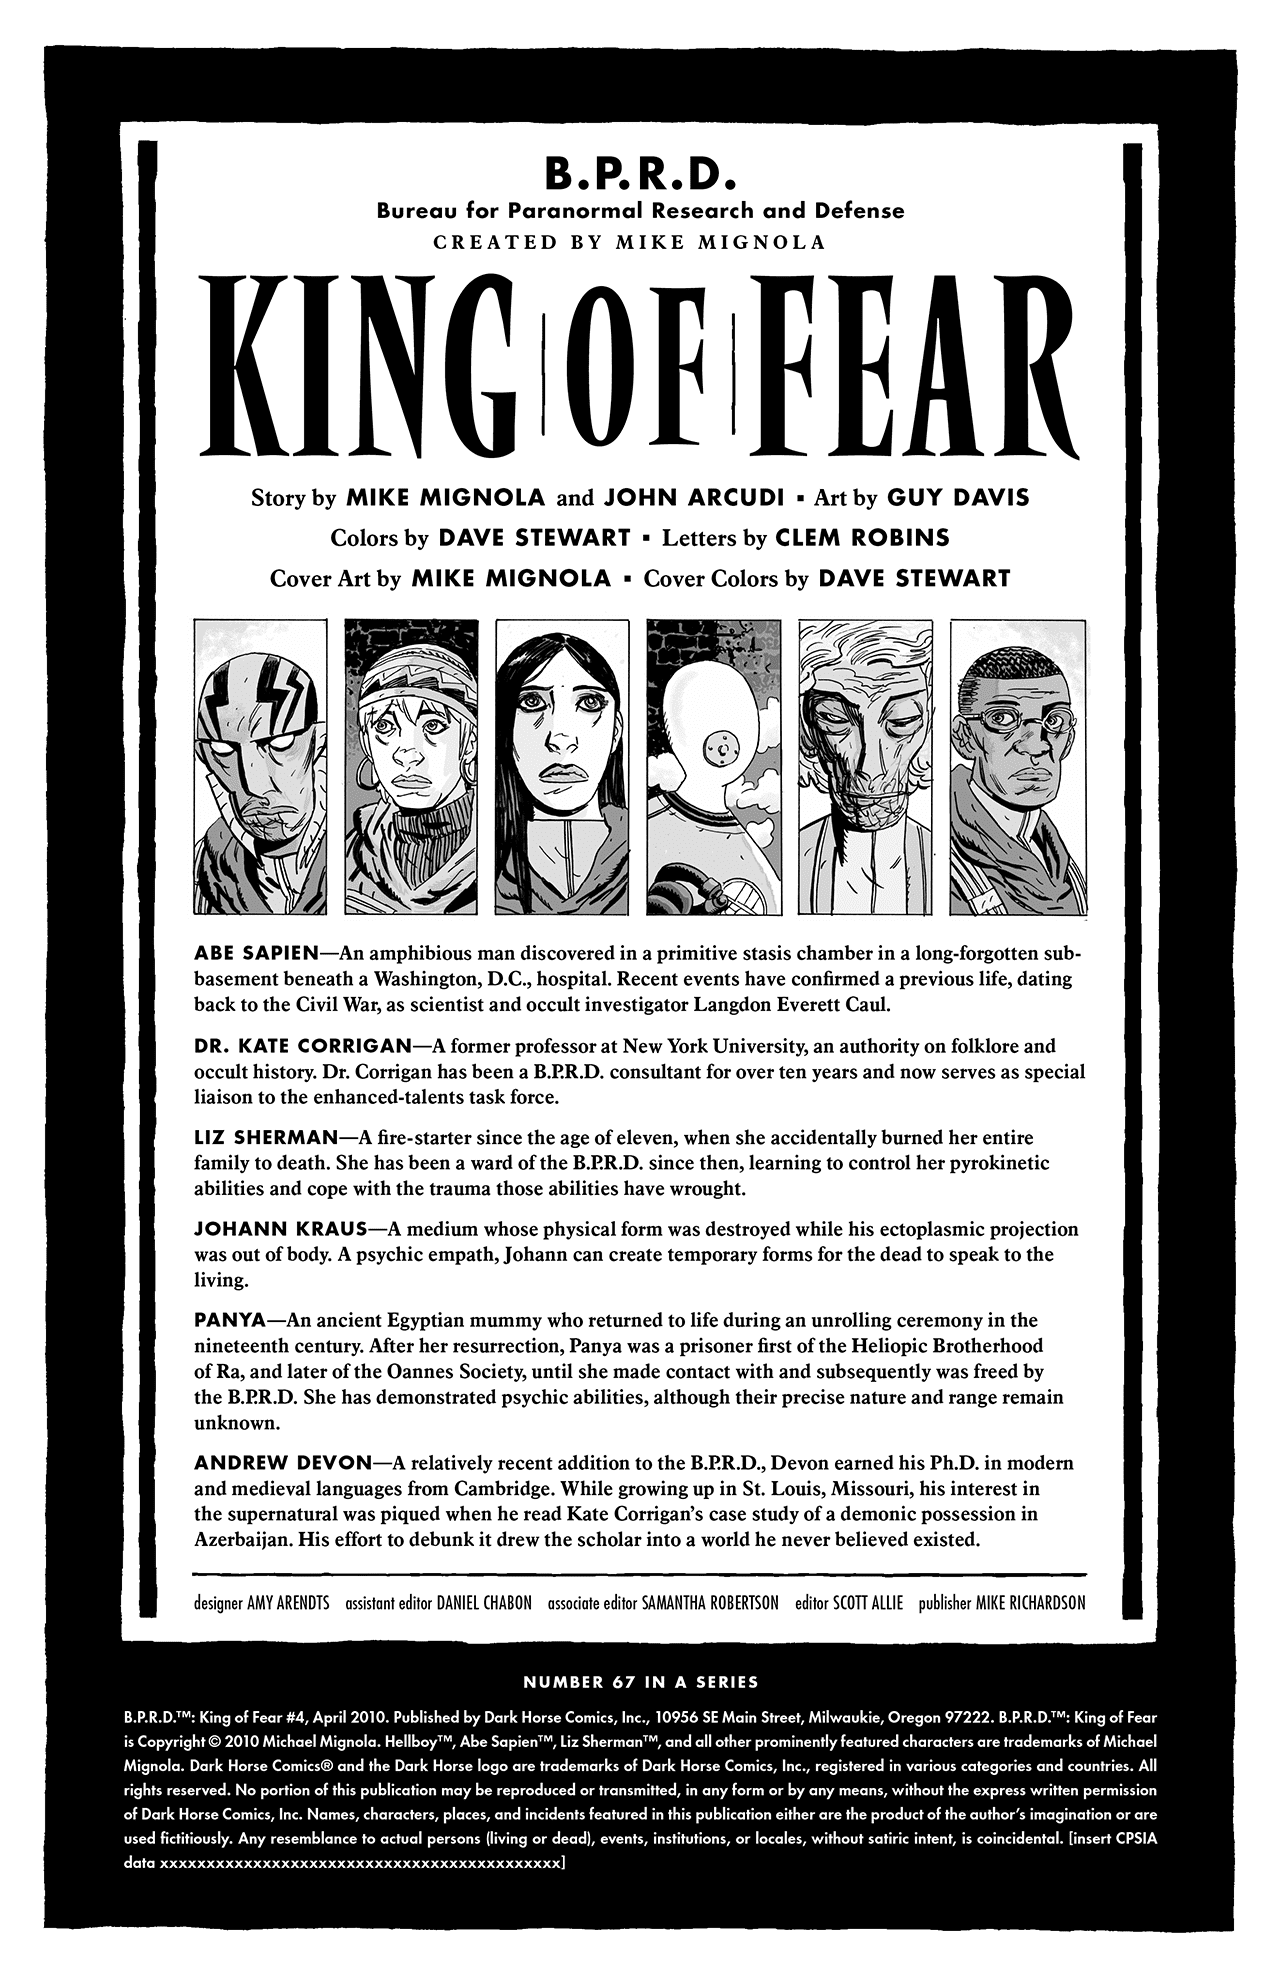 Read online B.P.R.D.: King of Fear comic -  Issue #4 - 2